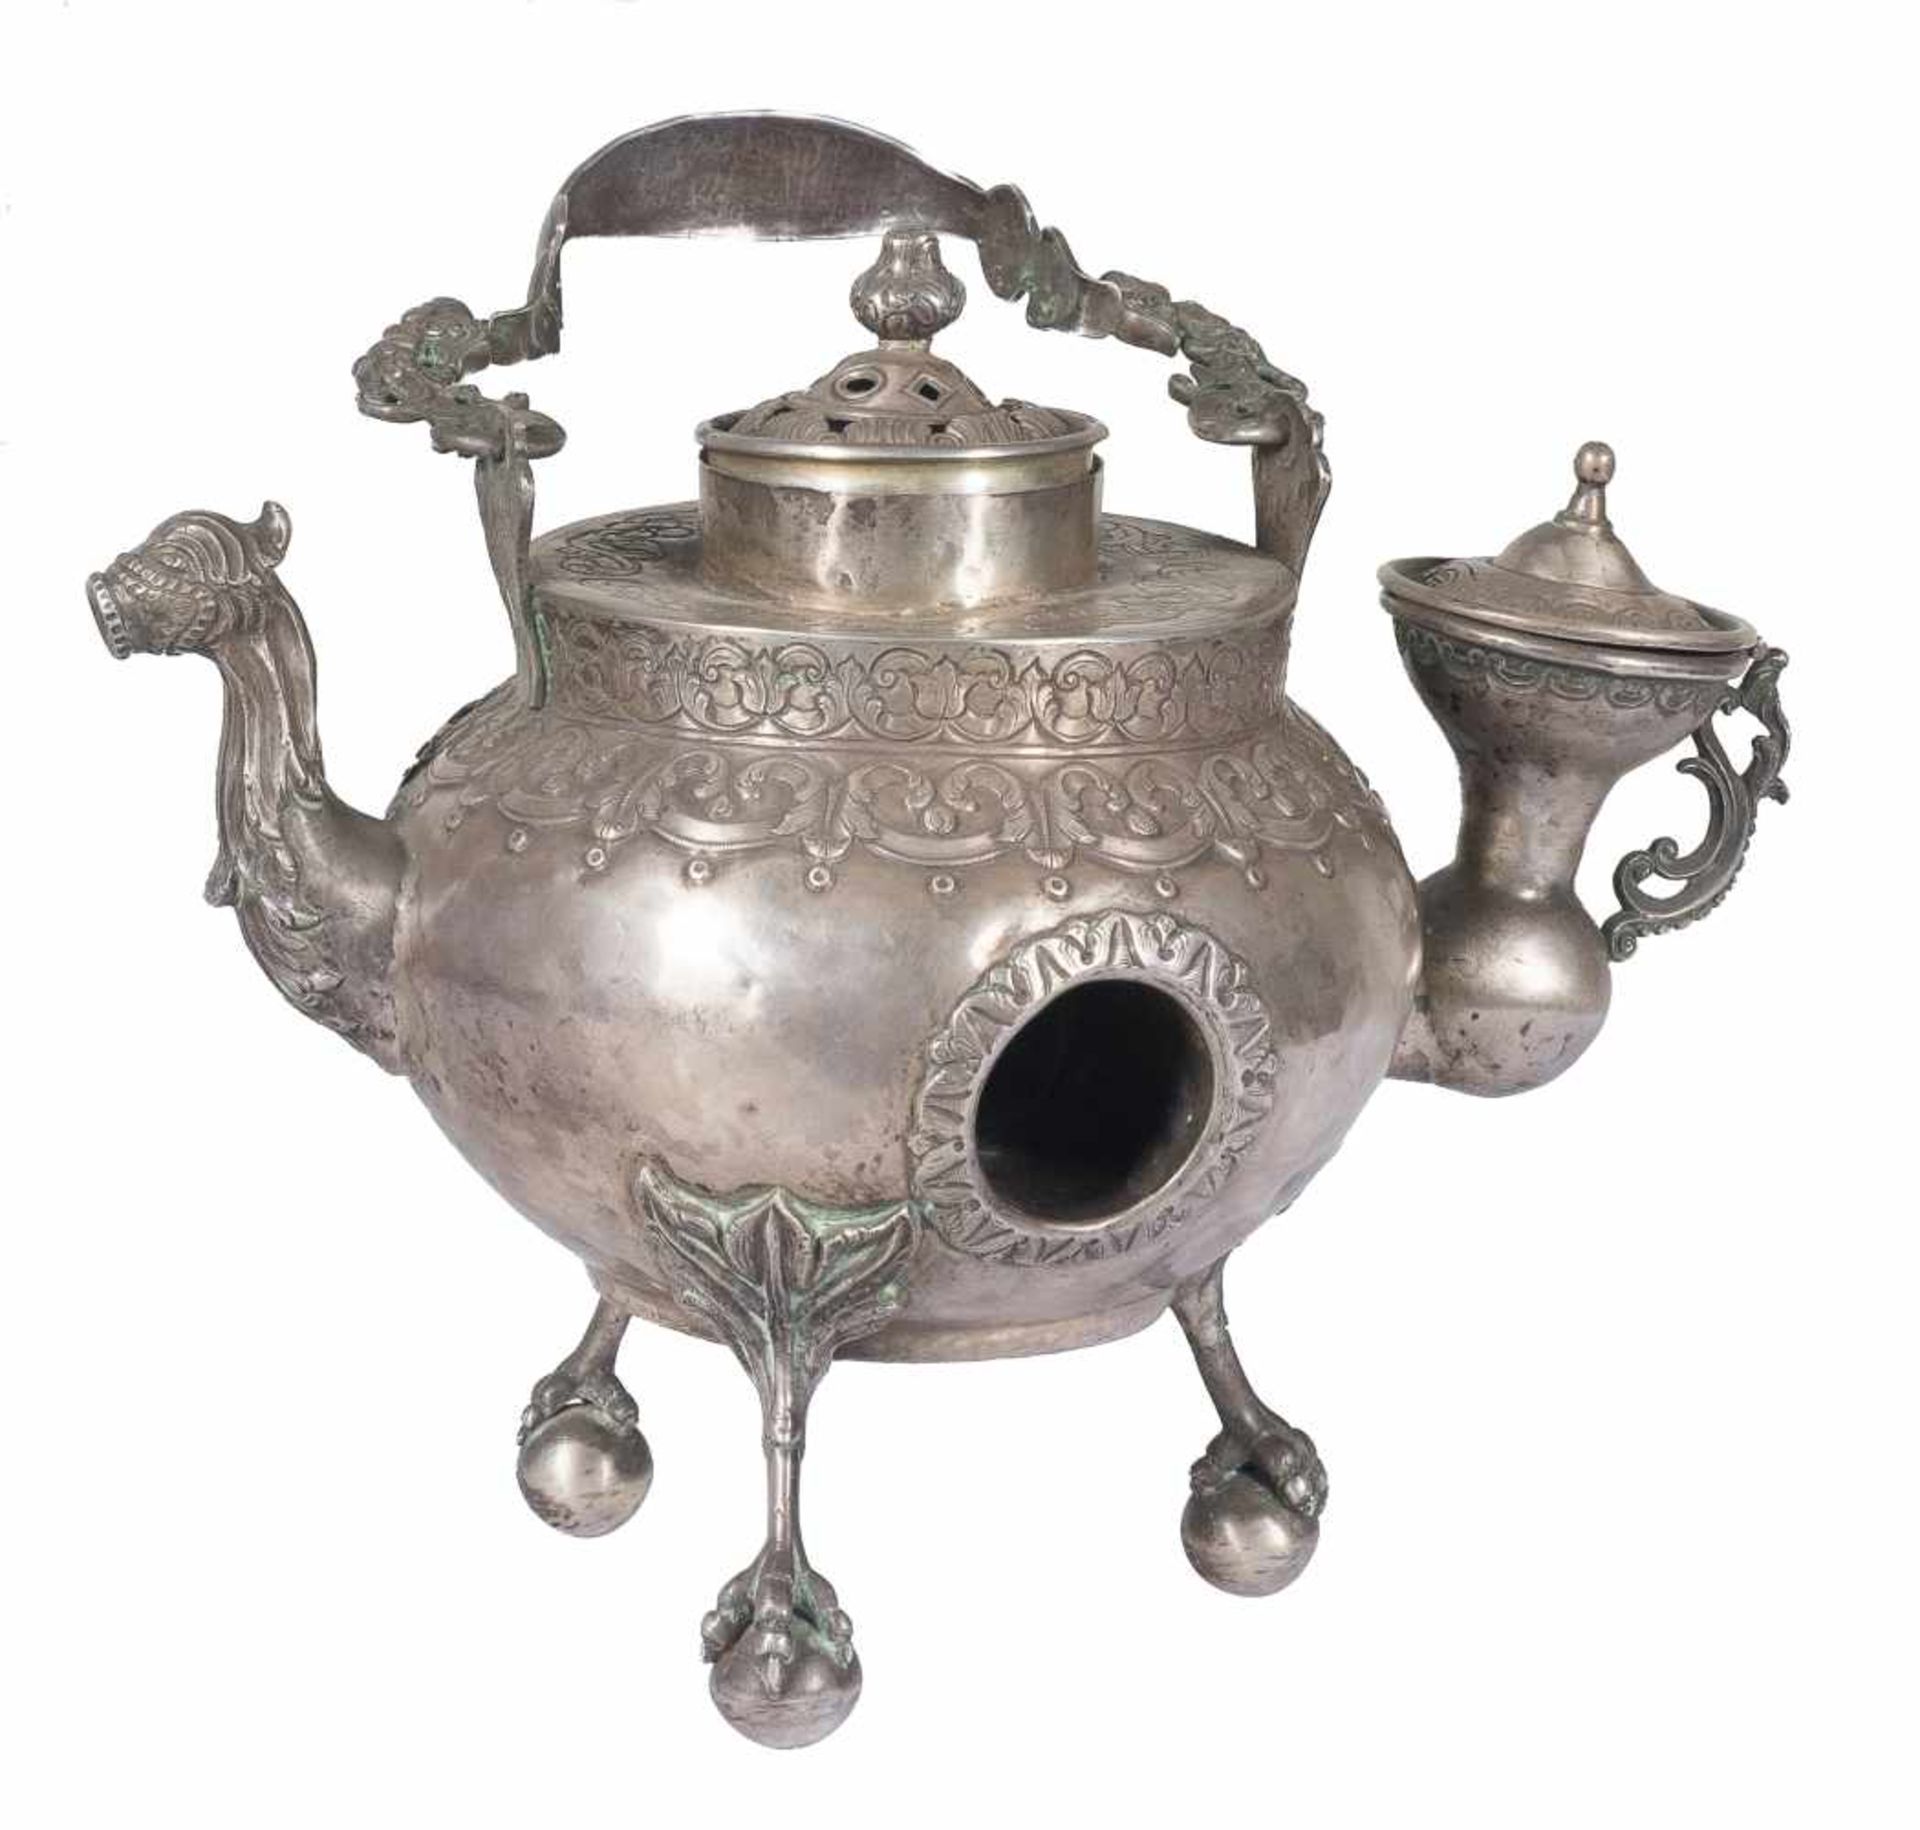 "Pava or Pavo Hornillo" (mate kettle). Hammered silver figure, cast, embossed and chased. Upper